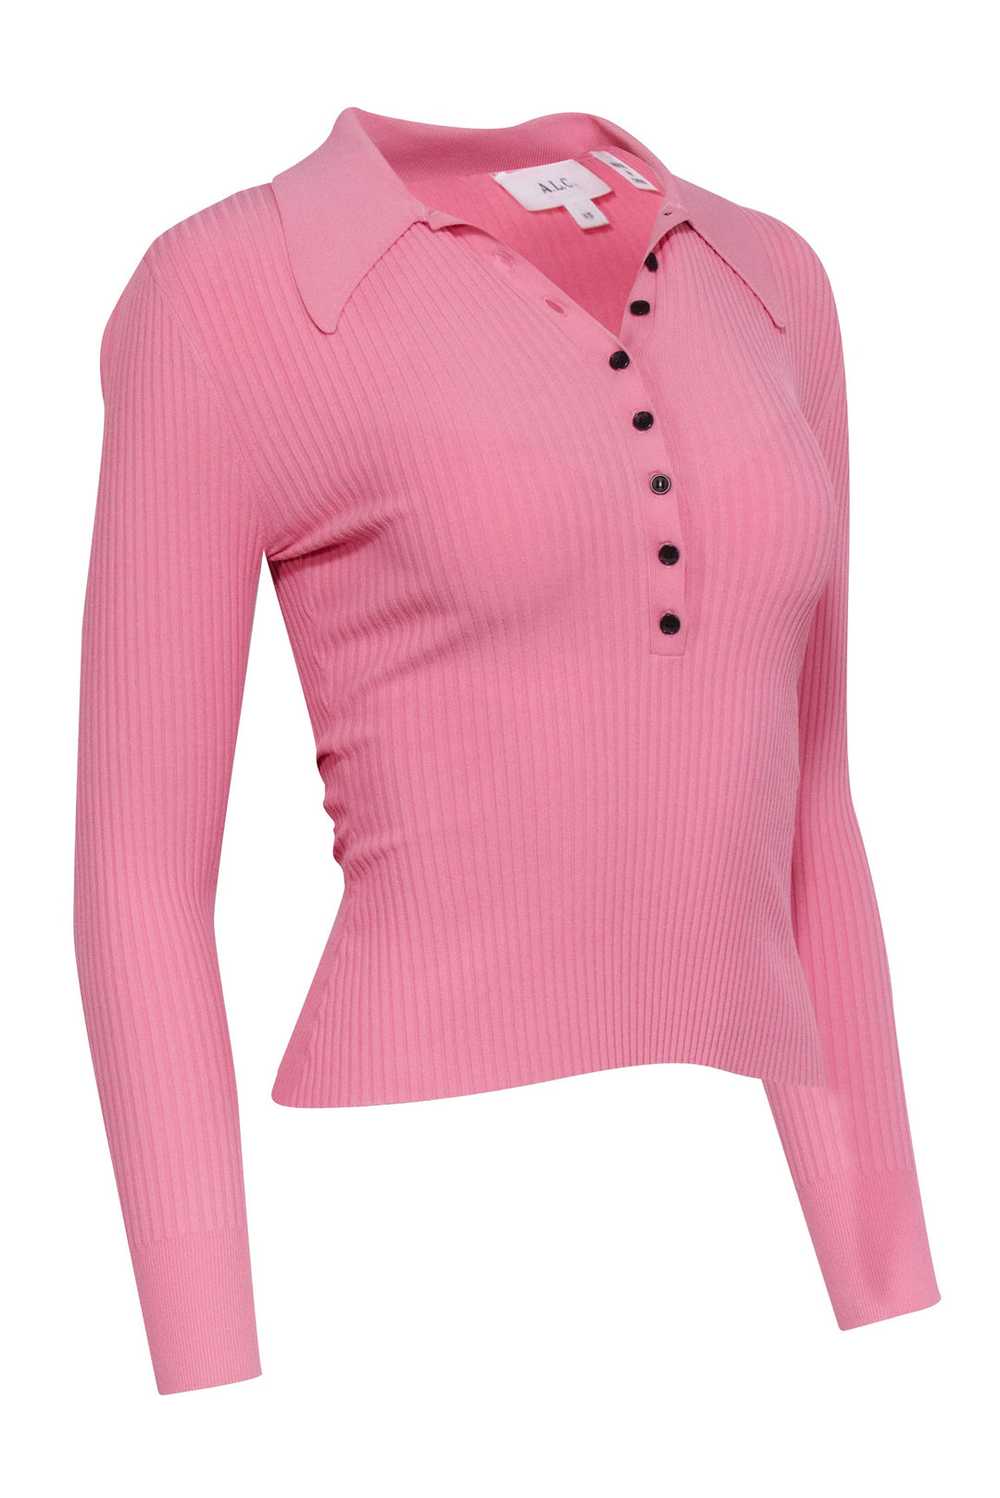 A.L.C. - Pink Ribbed Knit Polo Top Sz XS - image 2